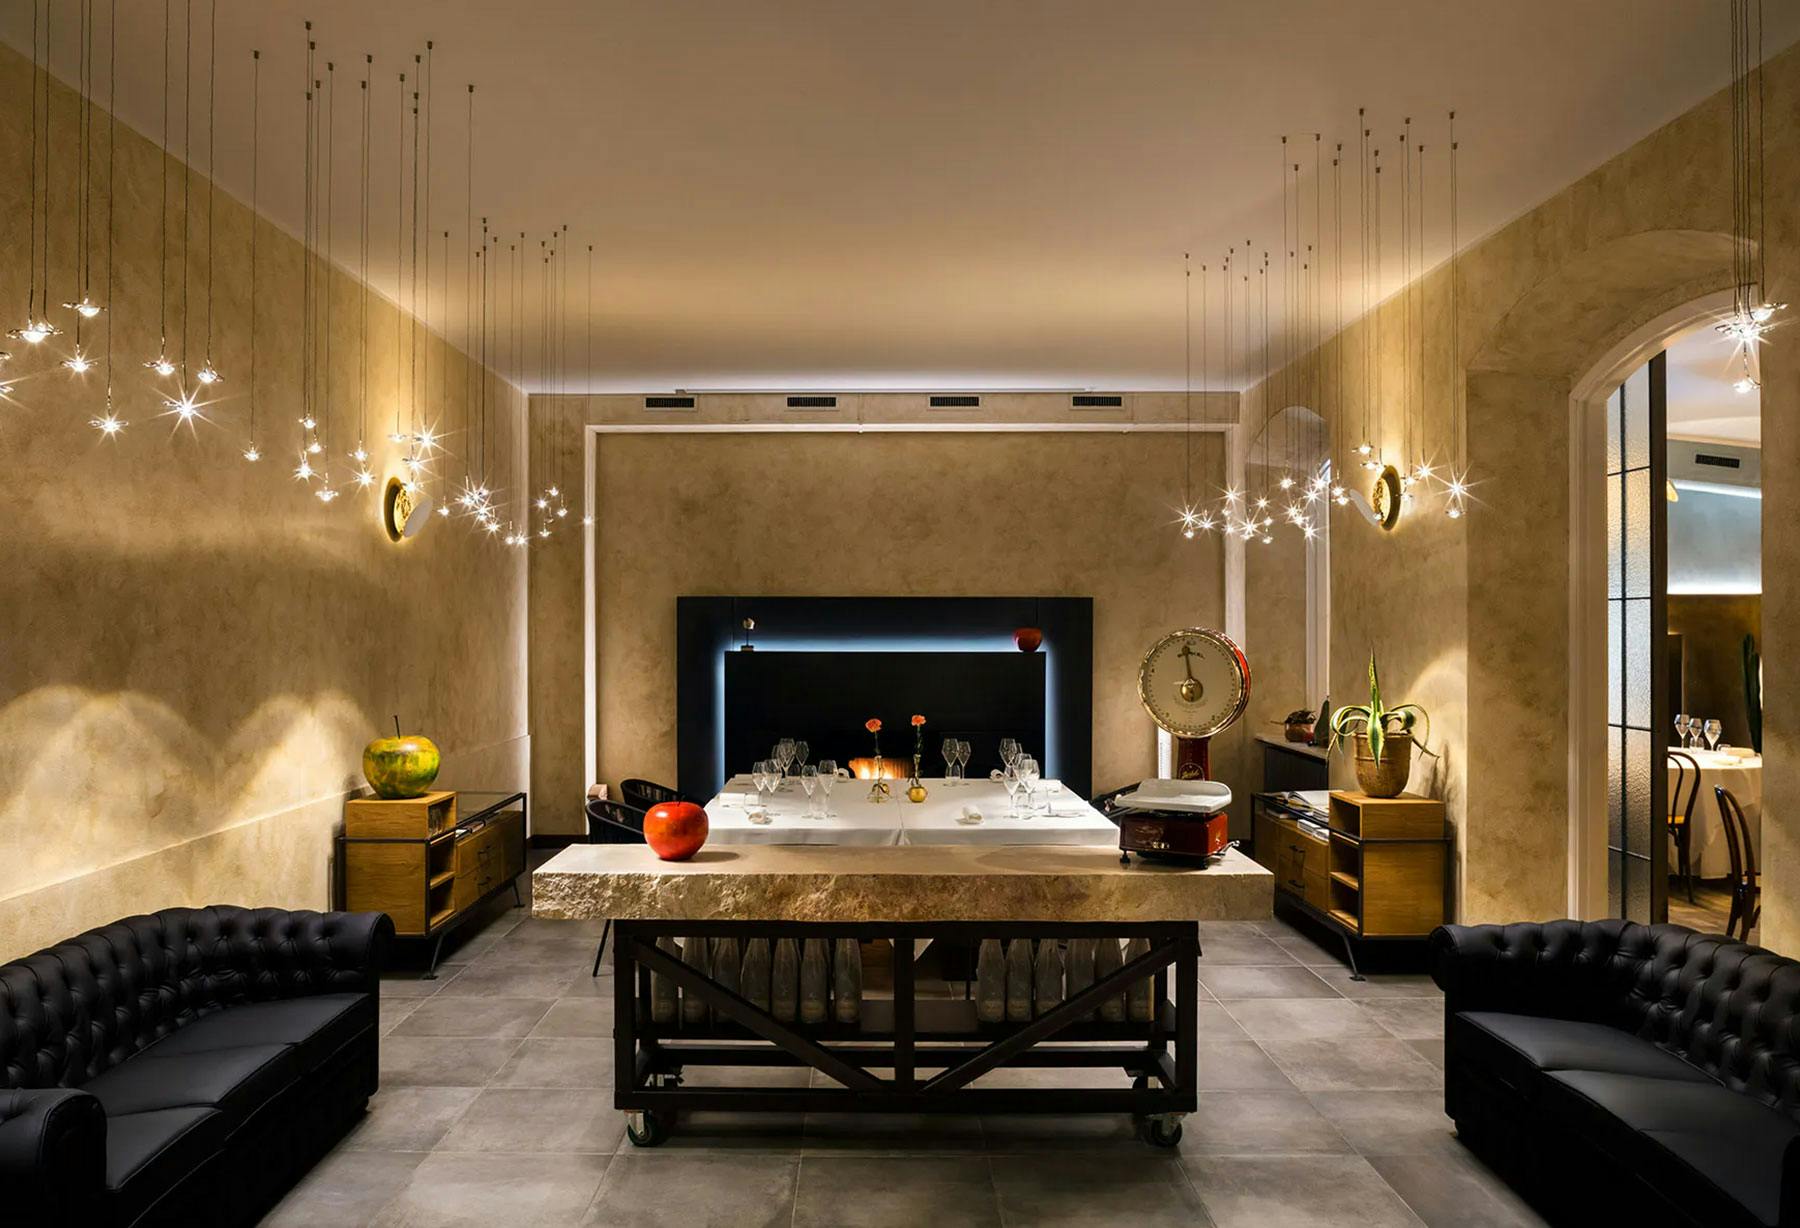 <p>Catellani &amp; Smith lighting products illuminate the new “Casual”, restaurant by Enrico Bartolini, the internationally renowned Michelin-starred chef. The “Casual Ristorante” is situated at the foot of the panoramic hill of San Vigilio , in the charming Upper Town of Bergamo surrounded by sixteenth-century Venetian walls, declared in 2017 Unesco World Heritage site.</p>
